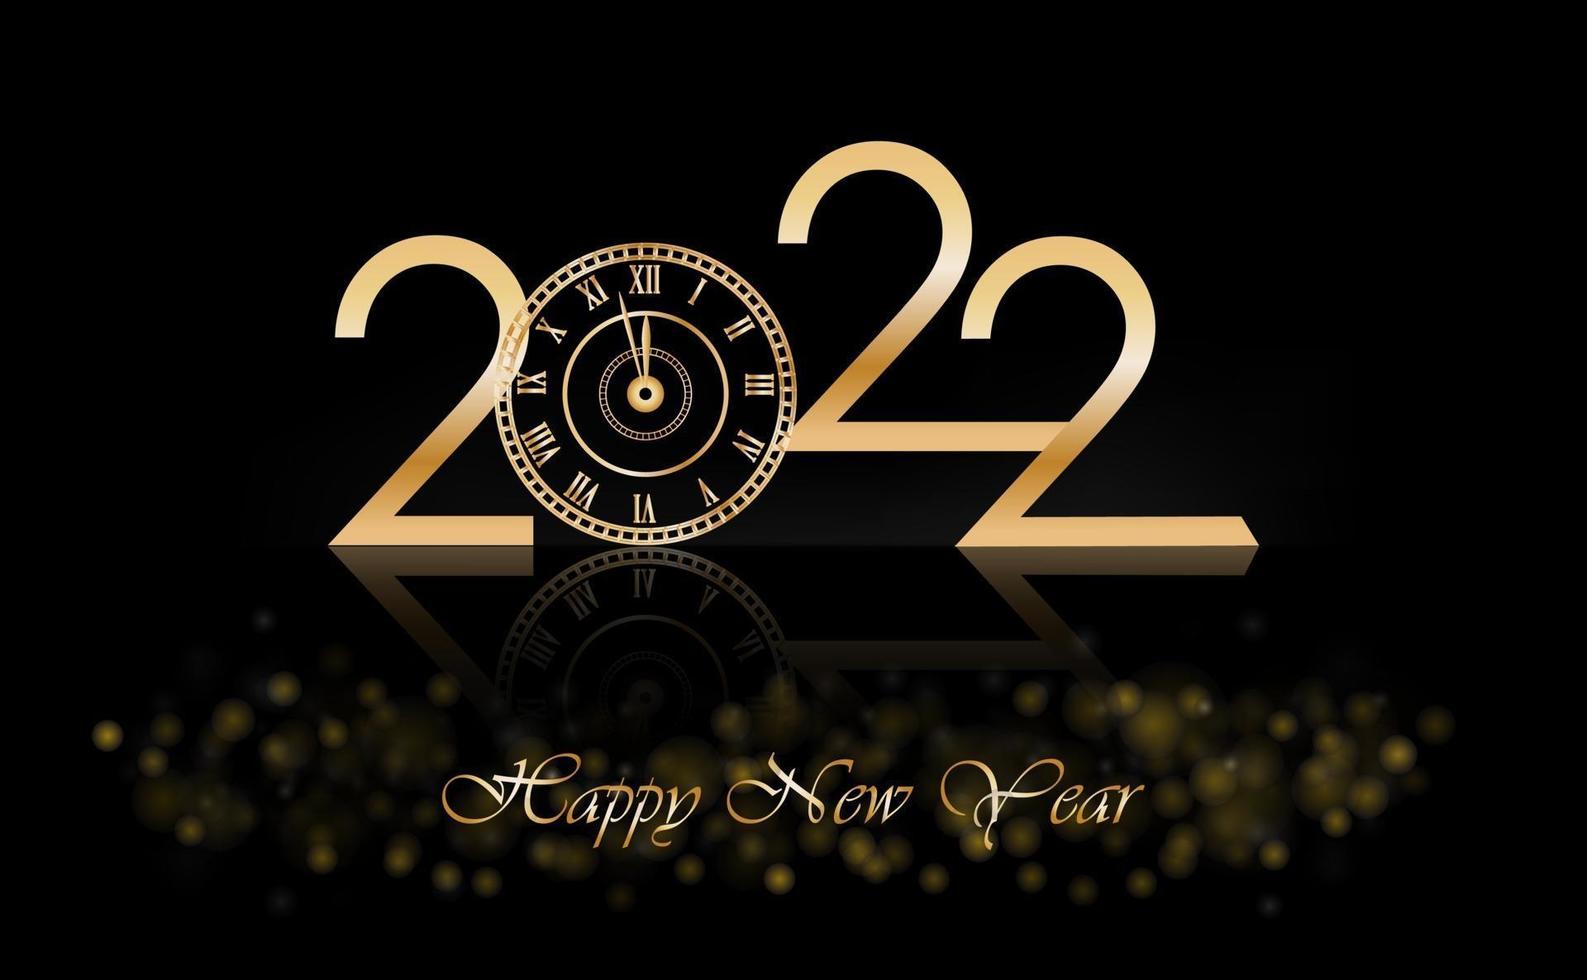 Happy New Year 2022: Best Messages, Quotes, Wishes And Images To ...